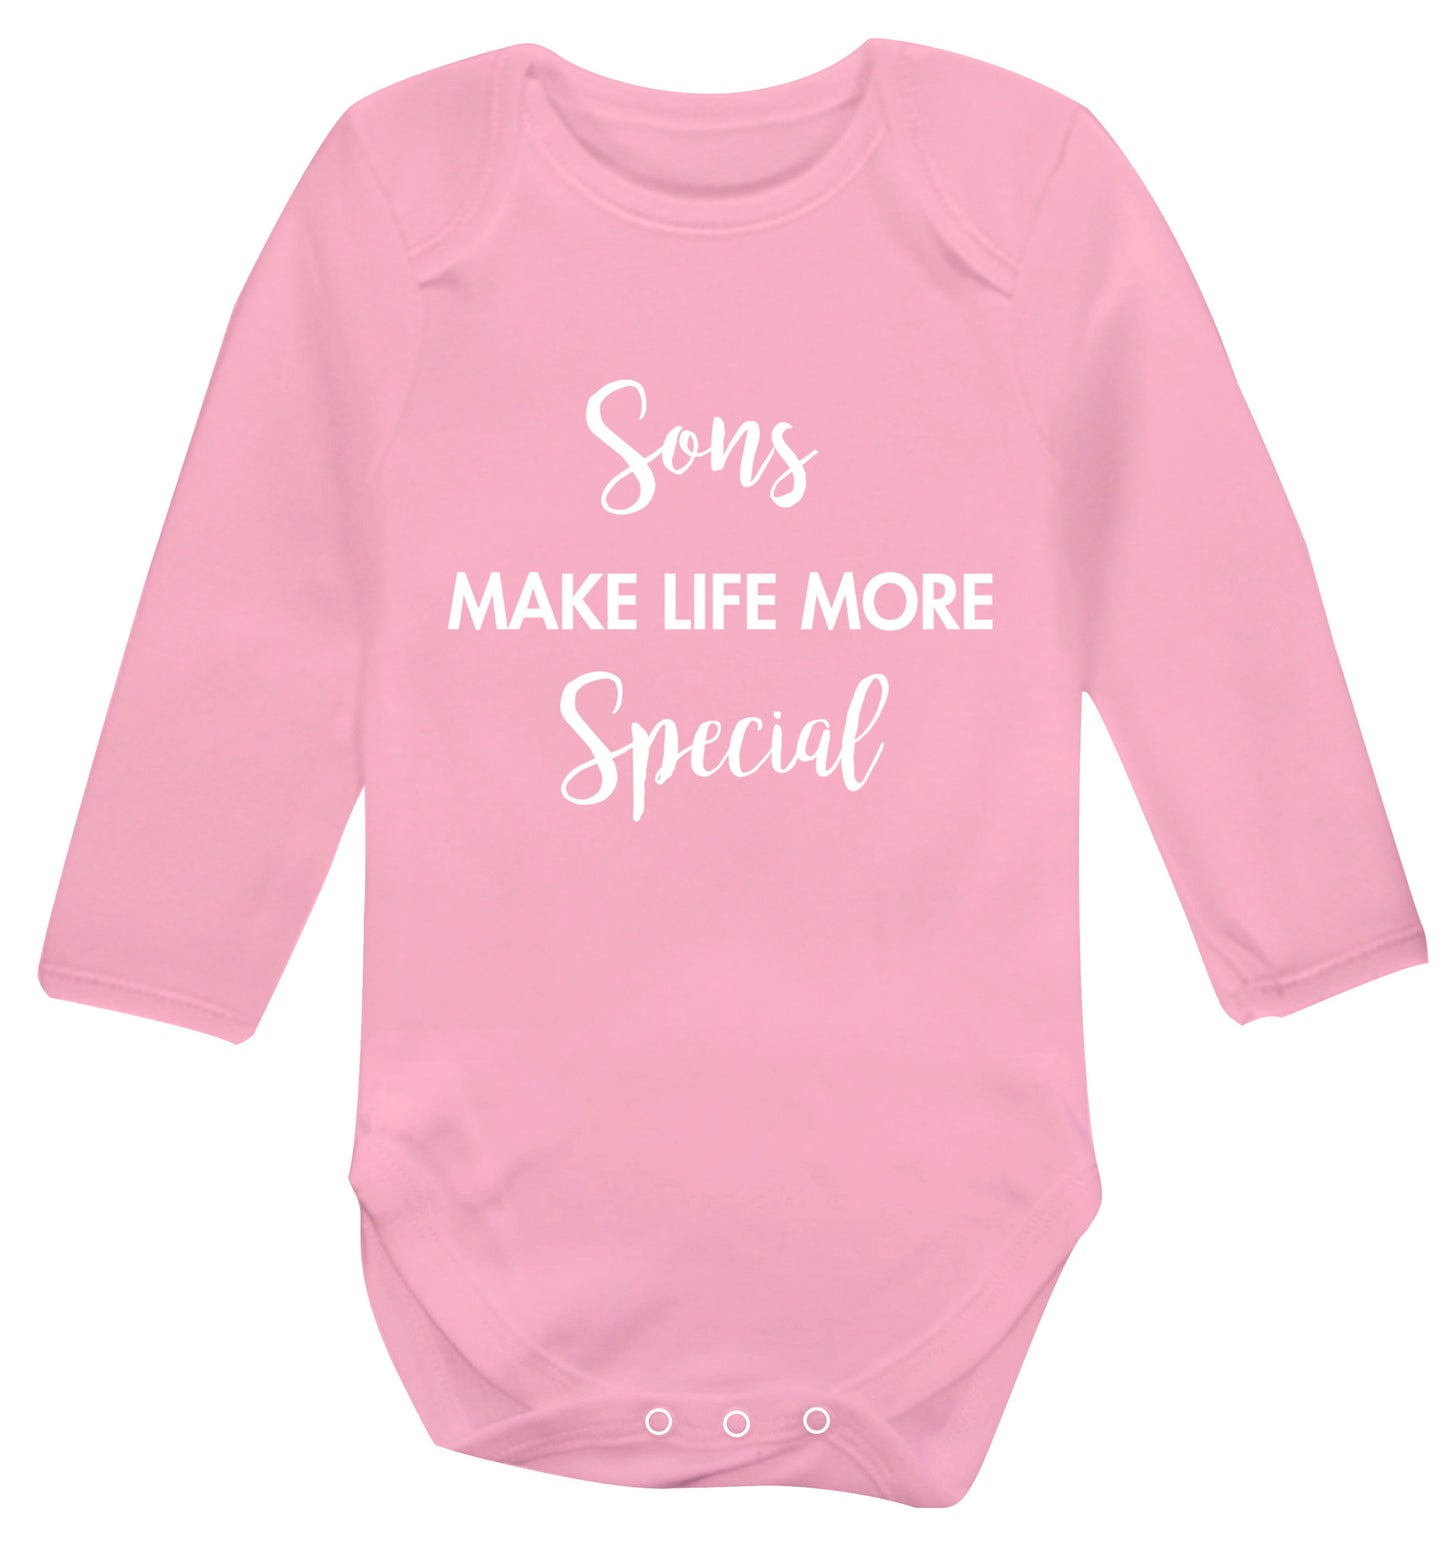 Sons make life more special Baby Vest long sleeved pale pink 6-12 months